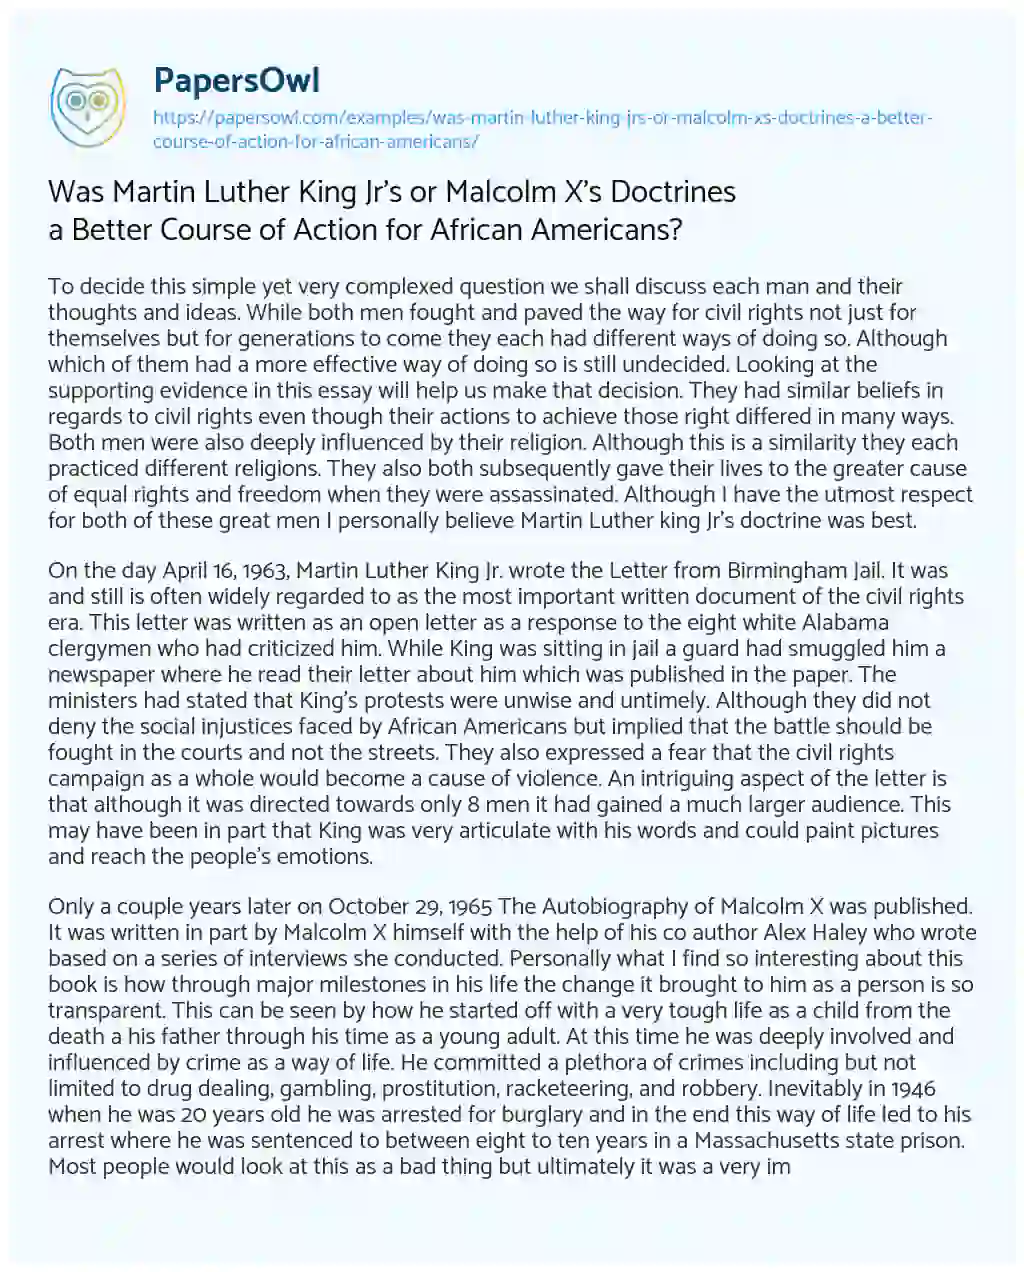 Essay on Was Martin Luther King Jr’s or Malcolm X’s Doctrines a Better Course of Action for African Americans?